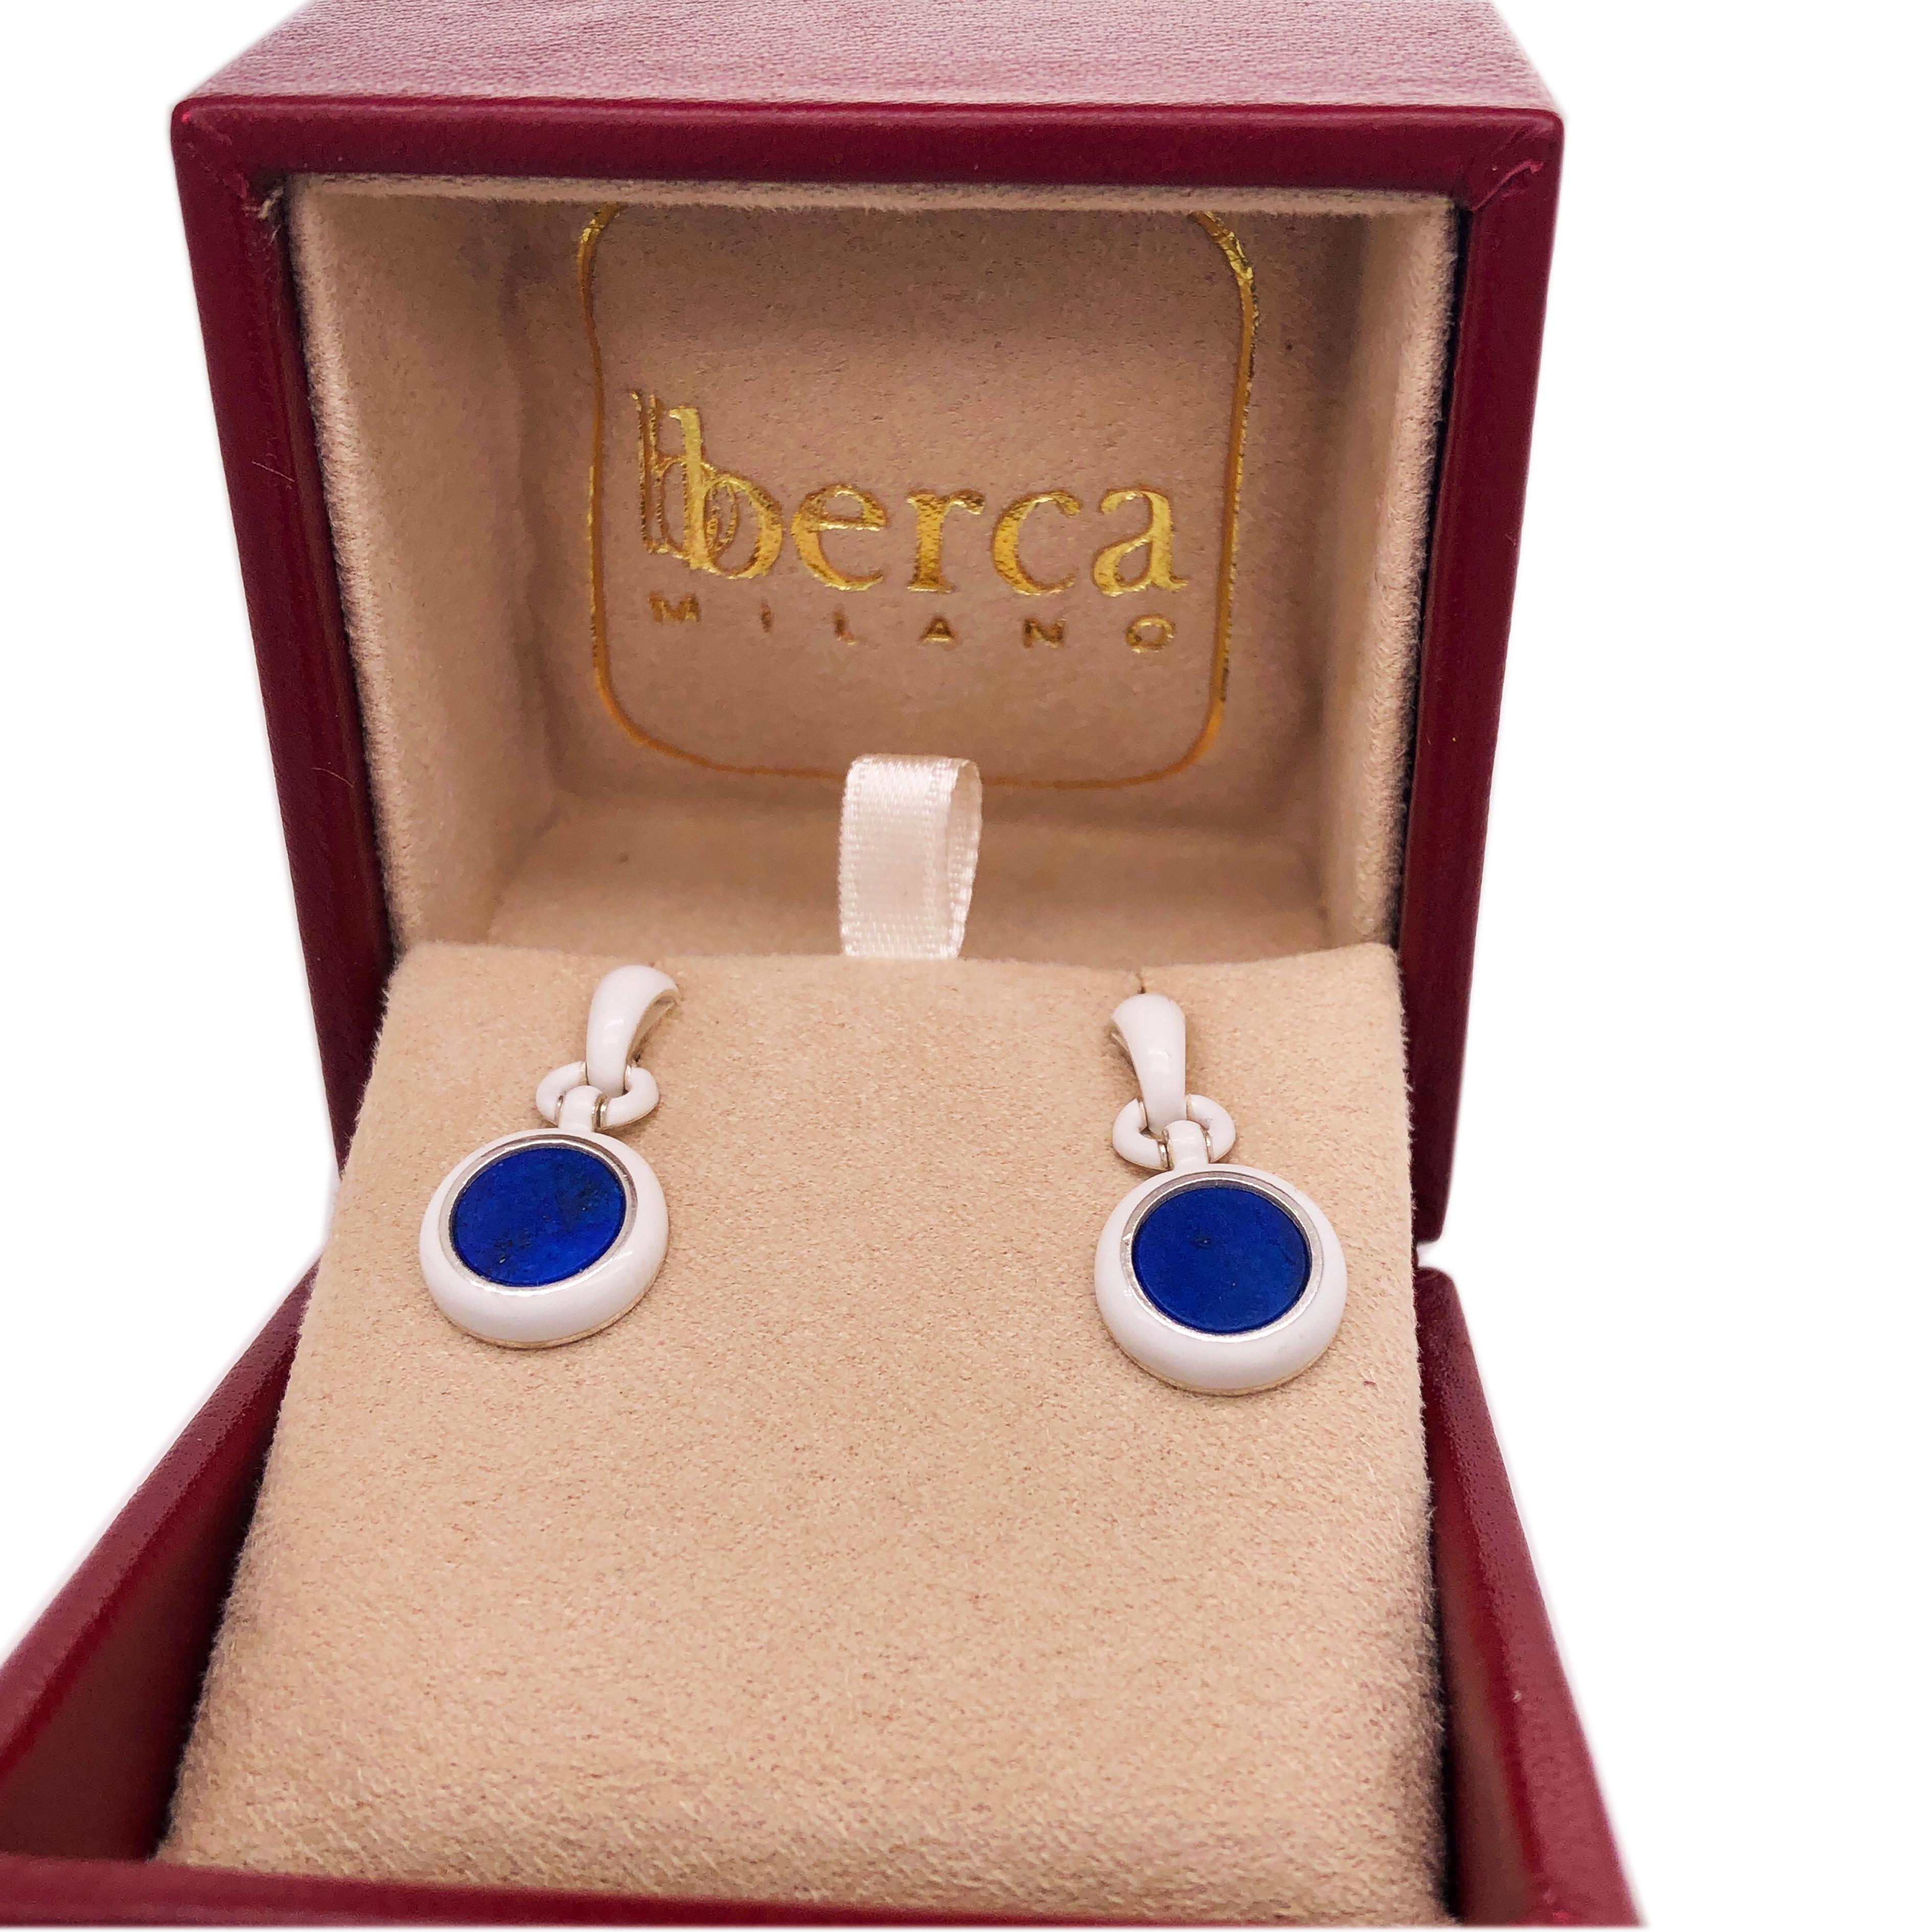 Chic yet Timeless Dangle Earrings Featuring 2.50Carat Natural Round Lapis Disk in a White Hand Enameled Sterling Silver Setting.
In our Precious Handcrafted Burgundy Leather Box.


Total Lenght 1.34 inches